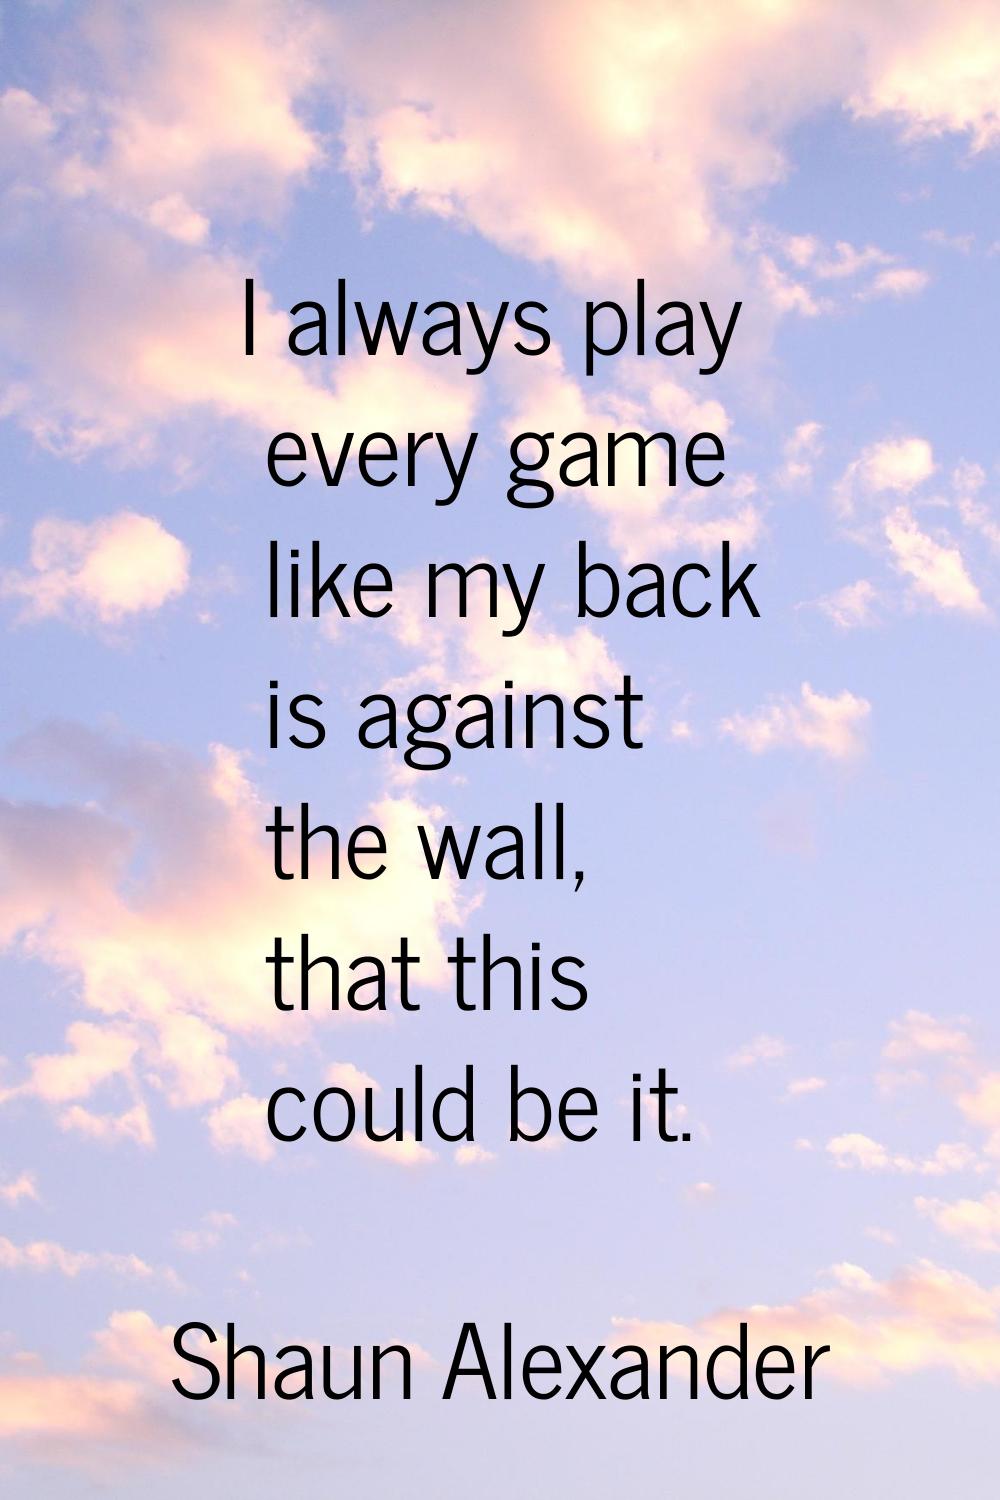 I always play every game like my back is against the wall, that this could be it.